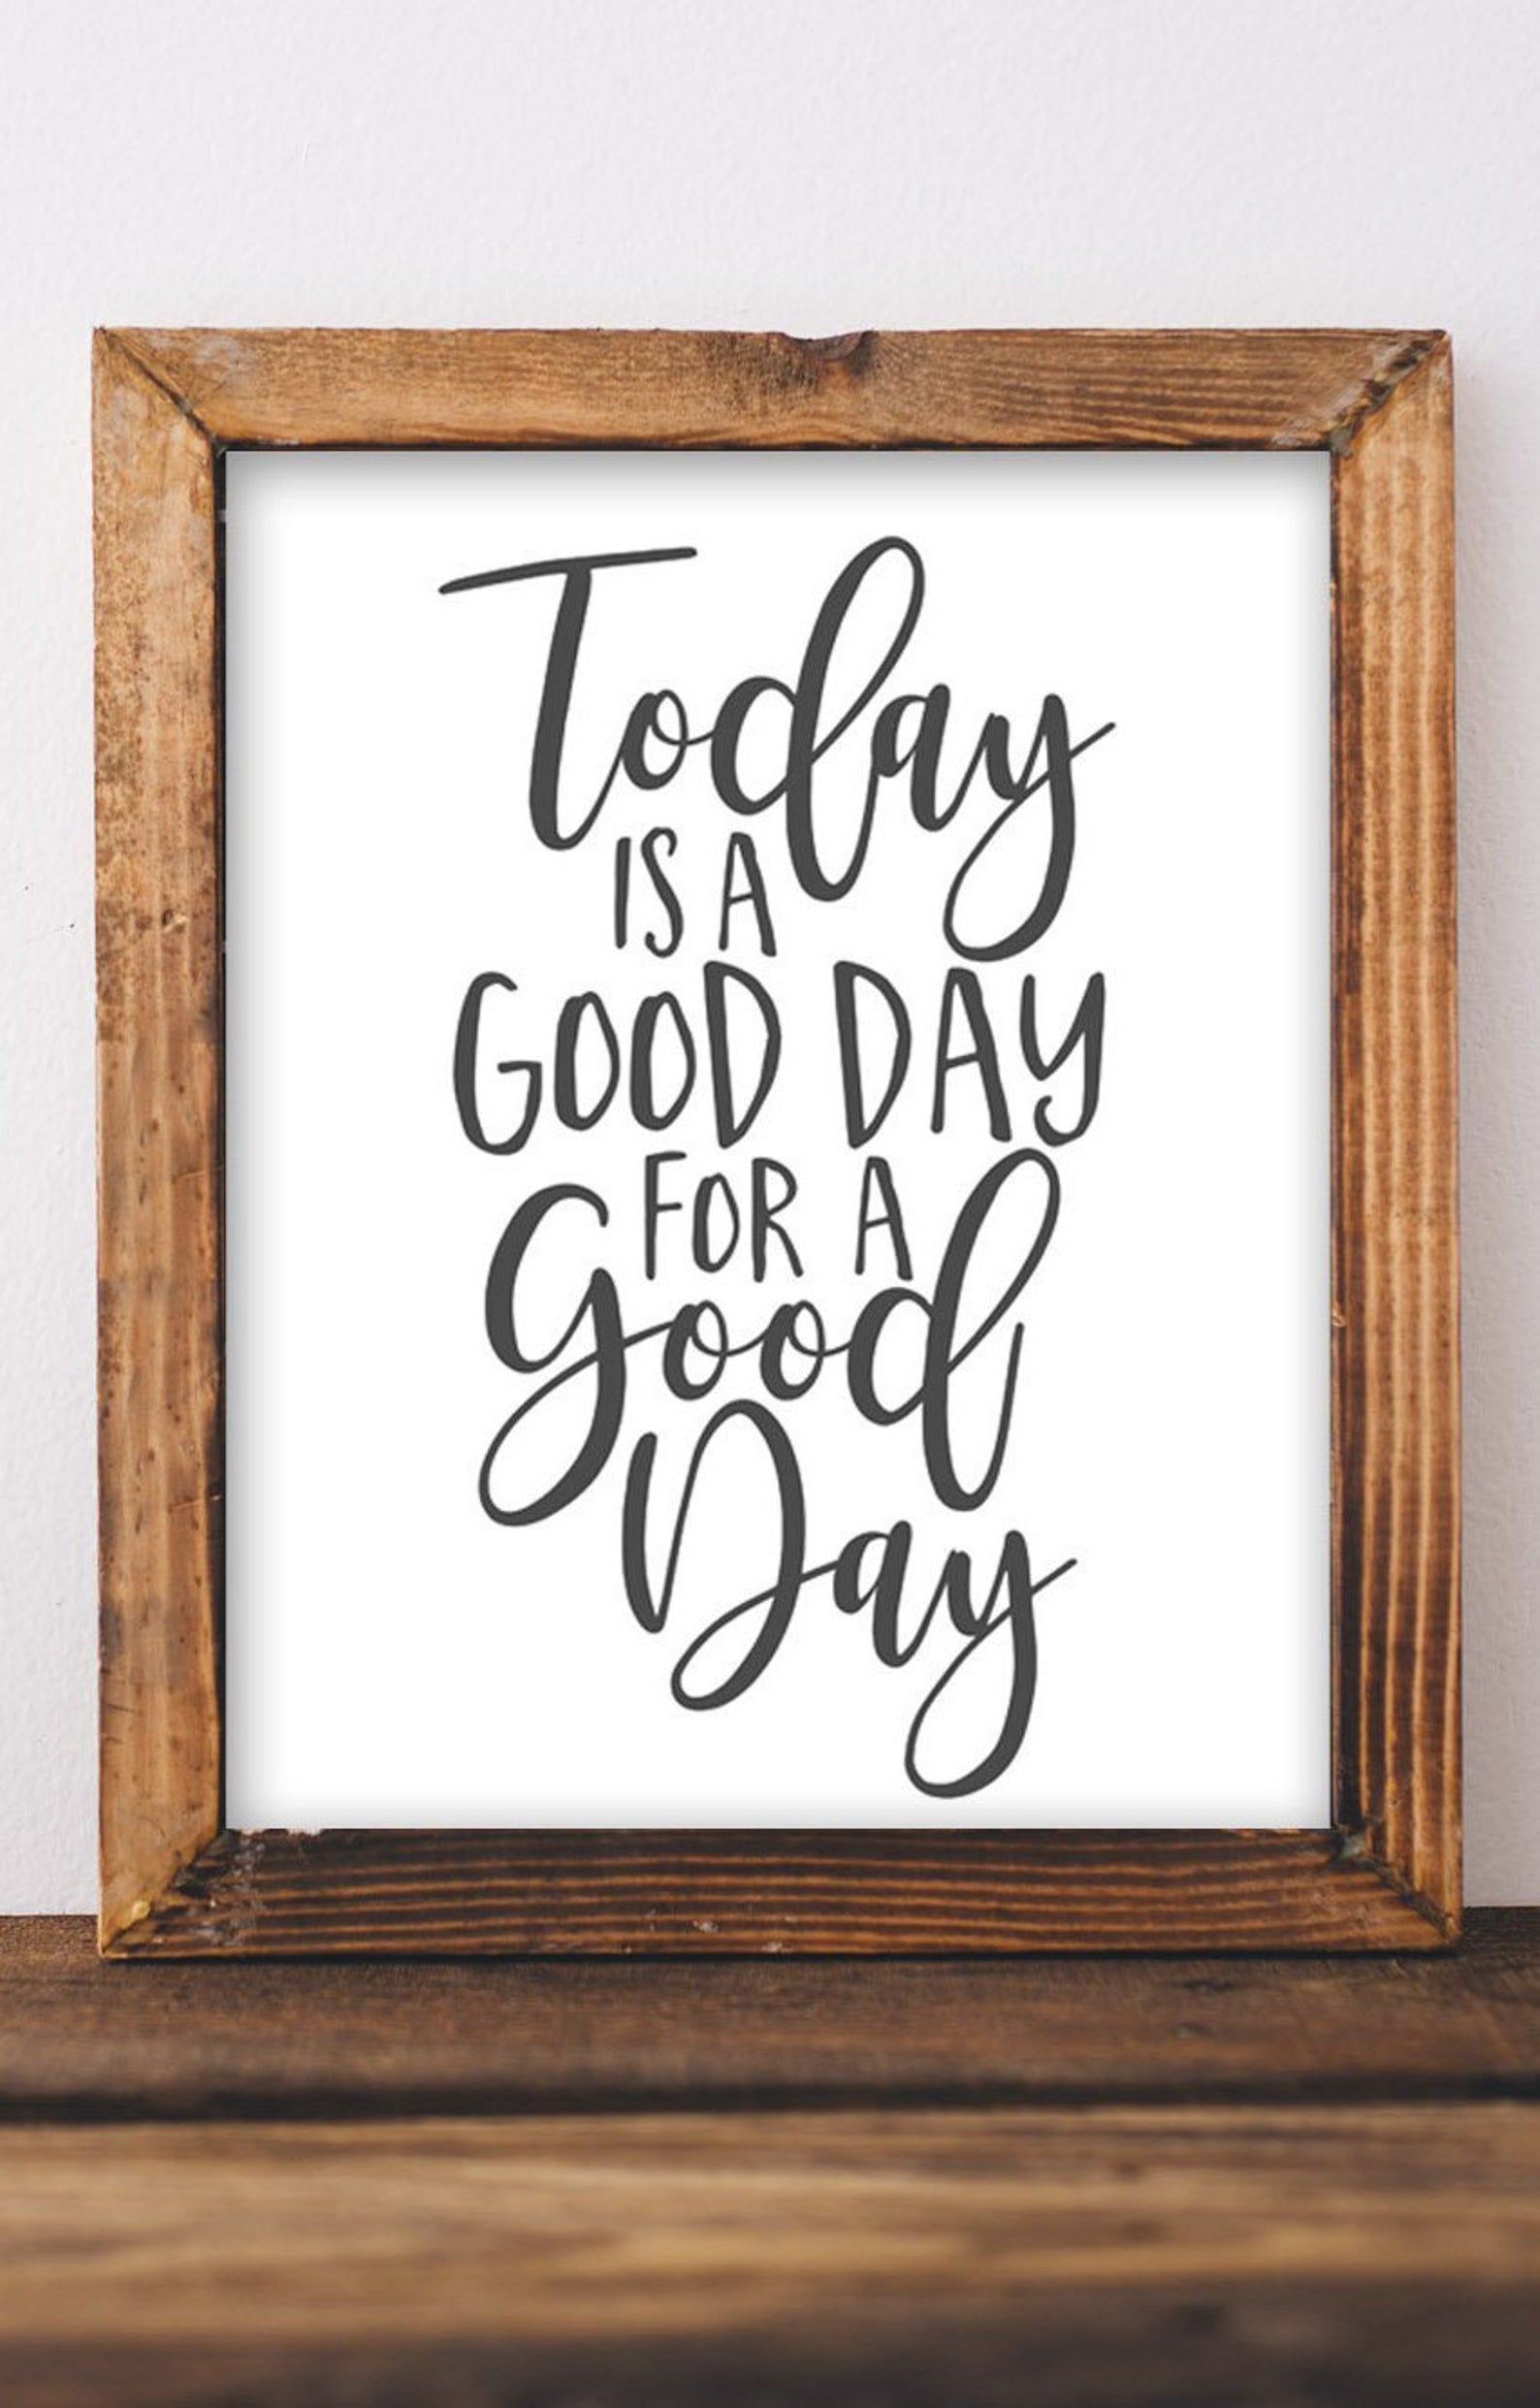 Printable Wall Art, Today is a good day for a good day, DIY home decor, Inspirational office decor, gallery wall decor, Printables, Quote - Printable Wall Art, Today is a good day for a good day, DIY home decor, Inspirational office decor, gallery wall decor, Printables, Quote -   19 diy projects to try home decor wall art ideas